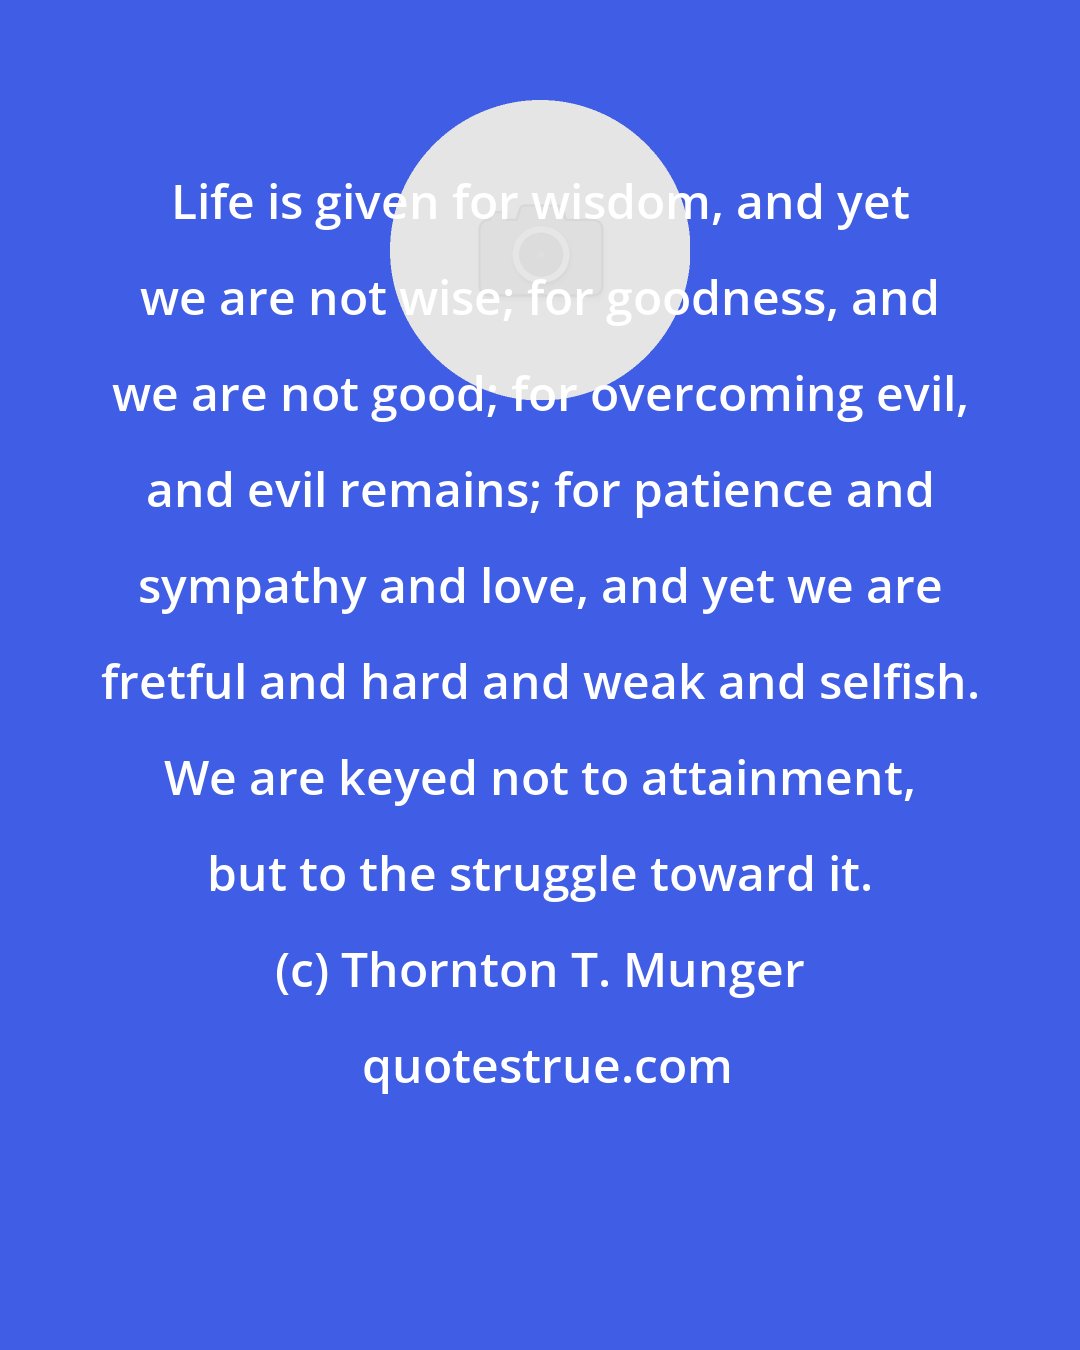 Thornton T. Munger: Life is given for wisdom, and yet we are not wise; for goodness, and we are not good; for overcoming evil, and evil remains; for patience and sympathy and love, and yet we are fretful and hard and weak and selfish. We are keyed not to attainment, but to the struggle toward it.